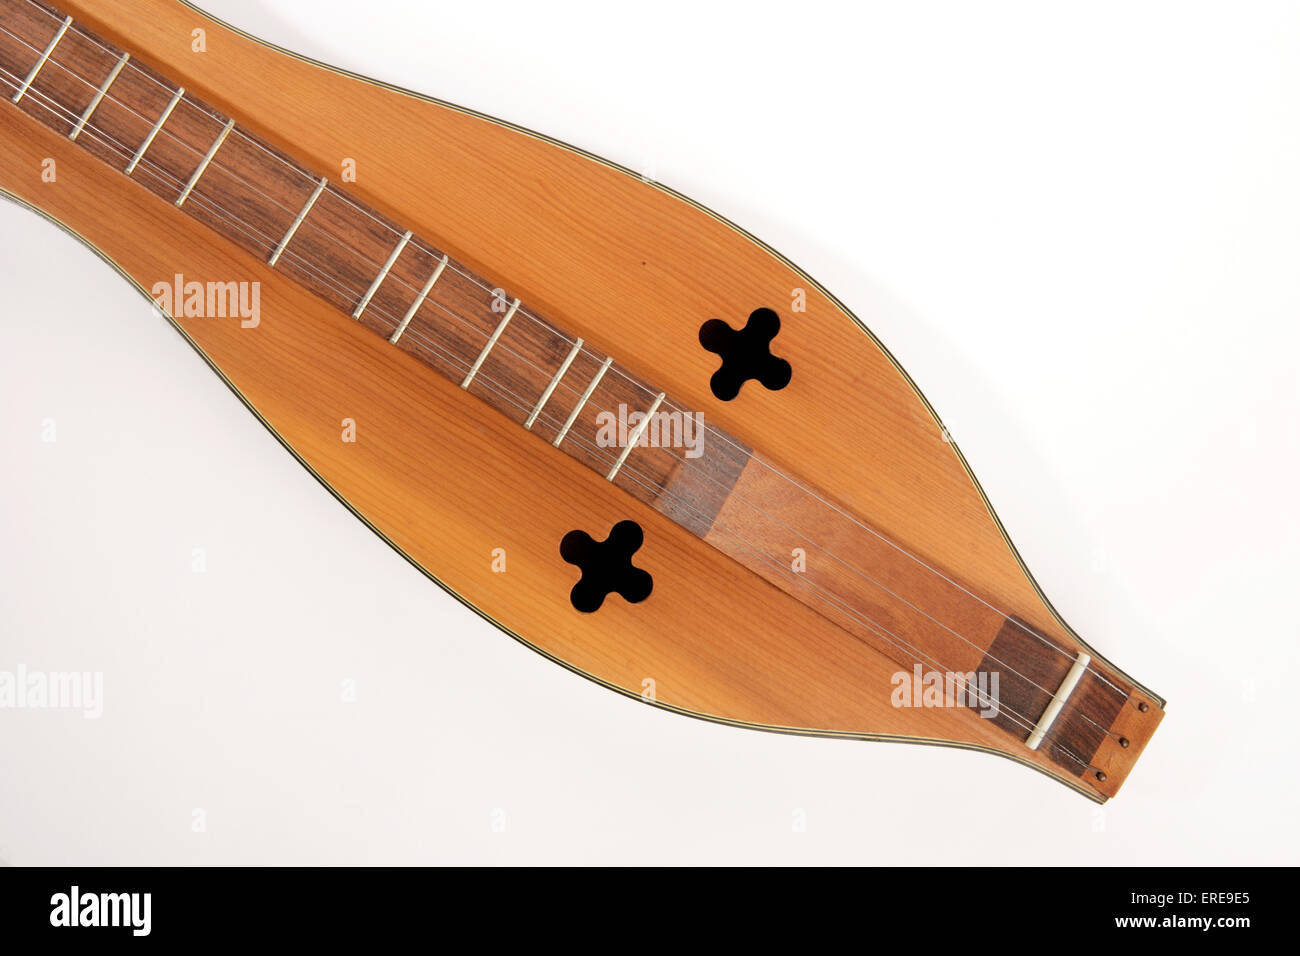 4 string Appalachian Dulcimer, also known as Mountain Dulcimer or mountain zither. Close up detail of strings and sound holes Stock Photo